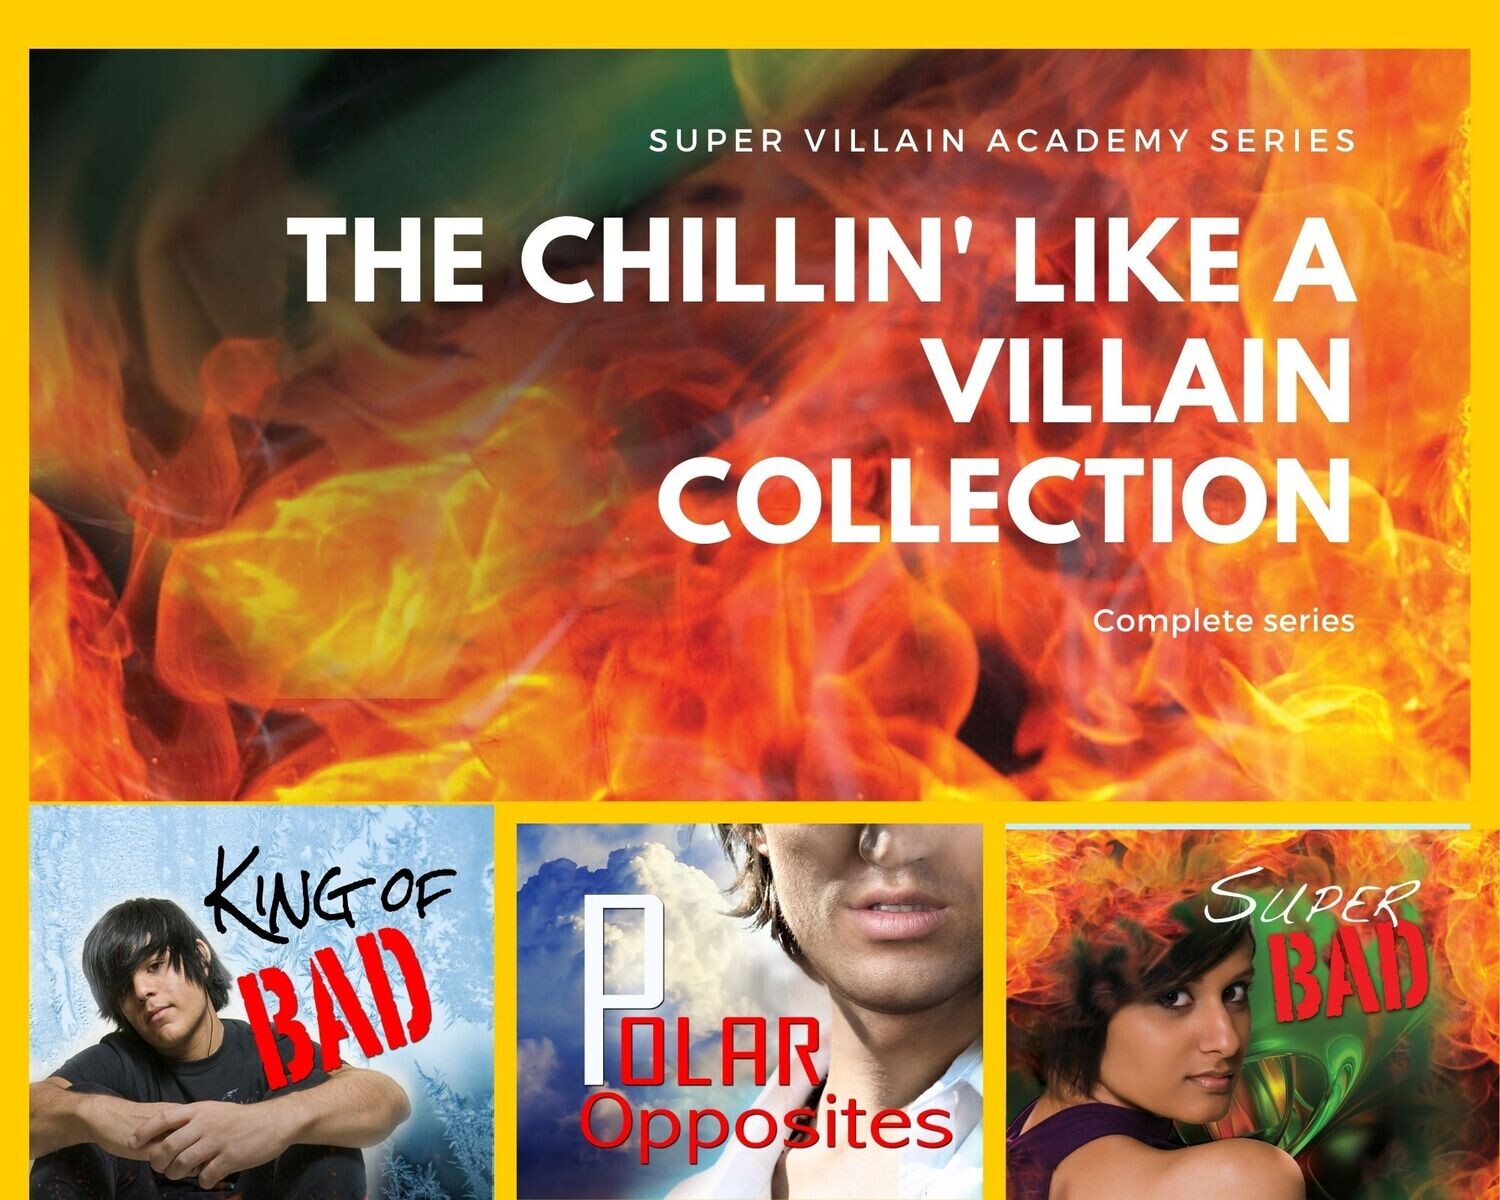 SUPER VILLAIN ACADEMY (the complete 3 book series) Young adult, speculative fiction